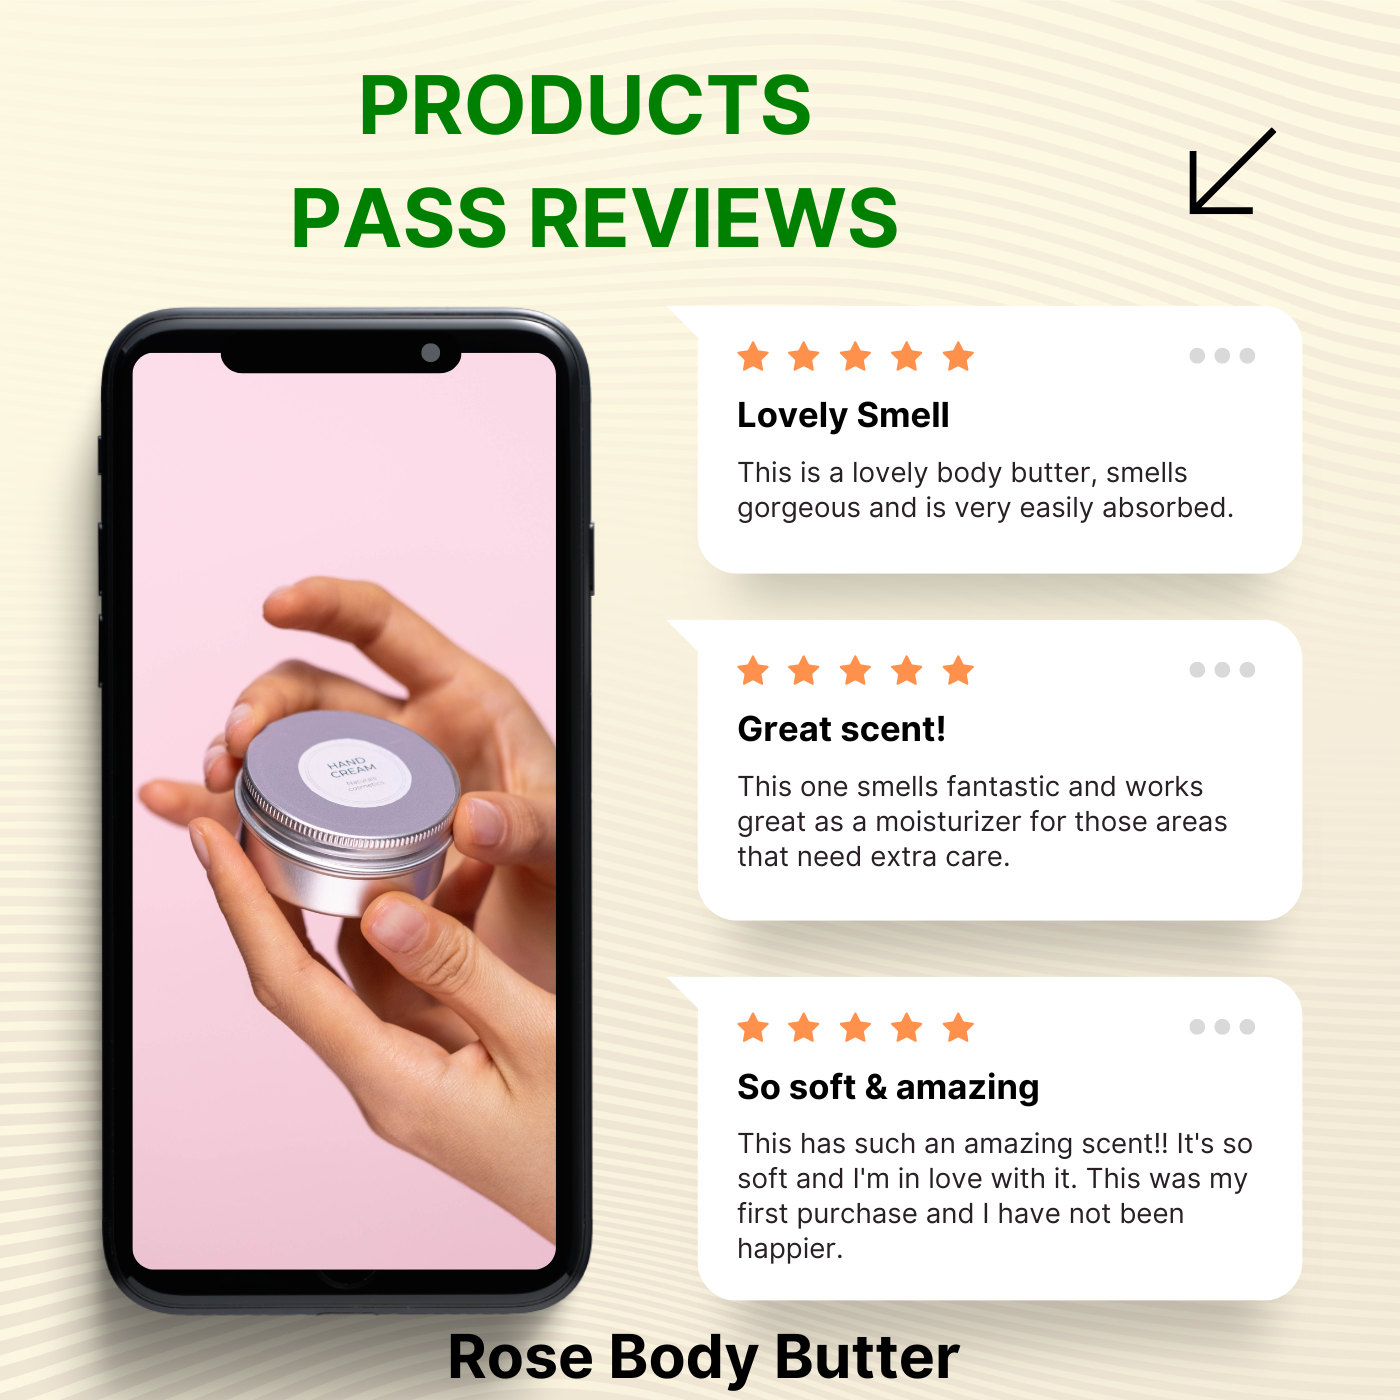 PRODUCTS PASS REVIEWS